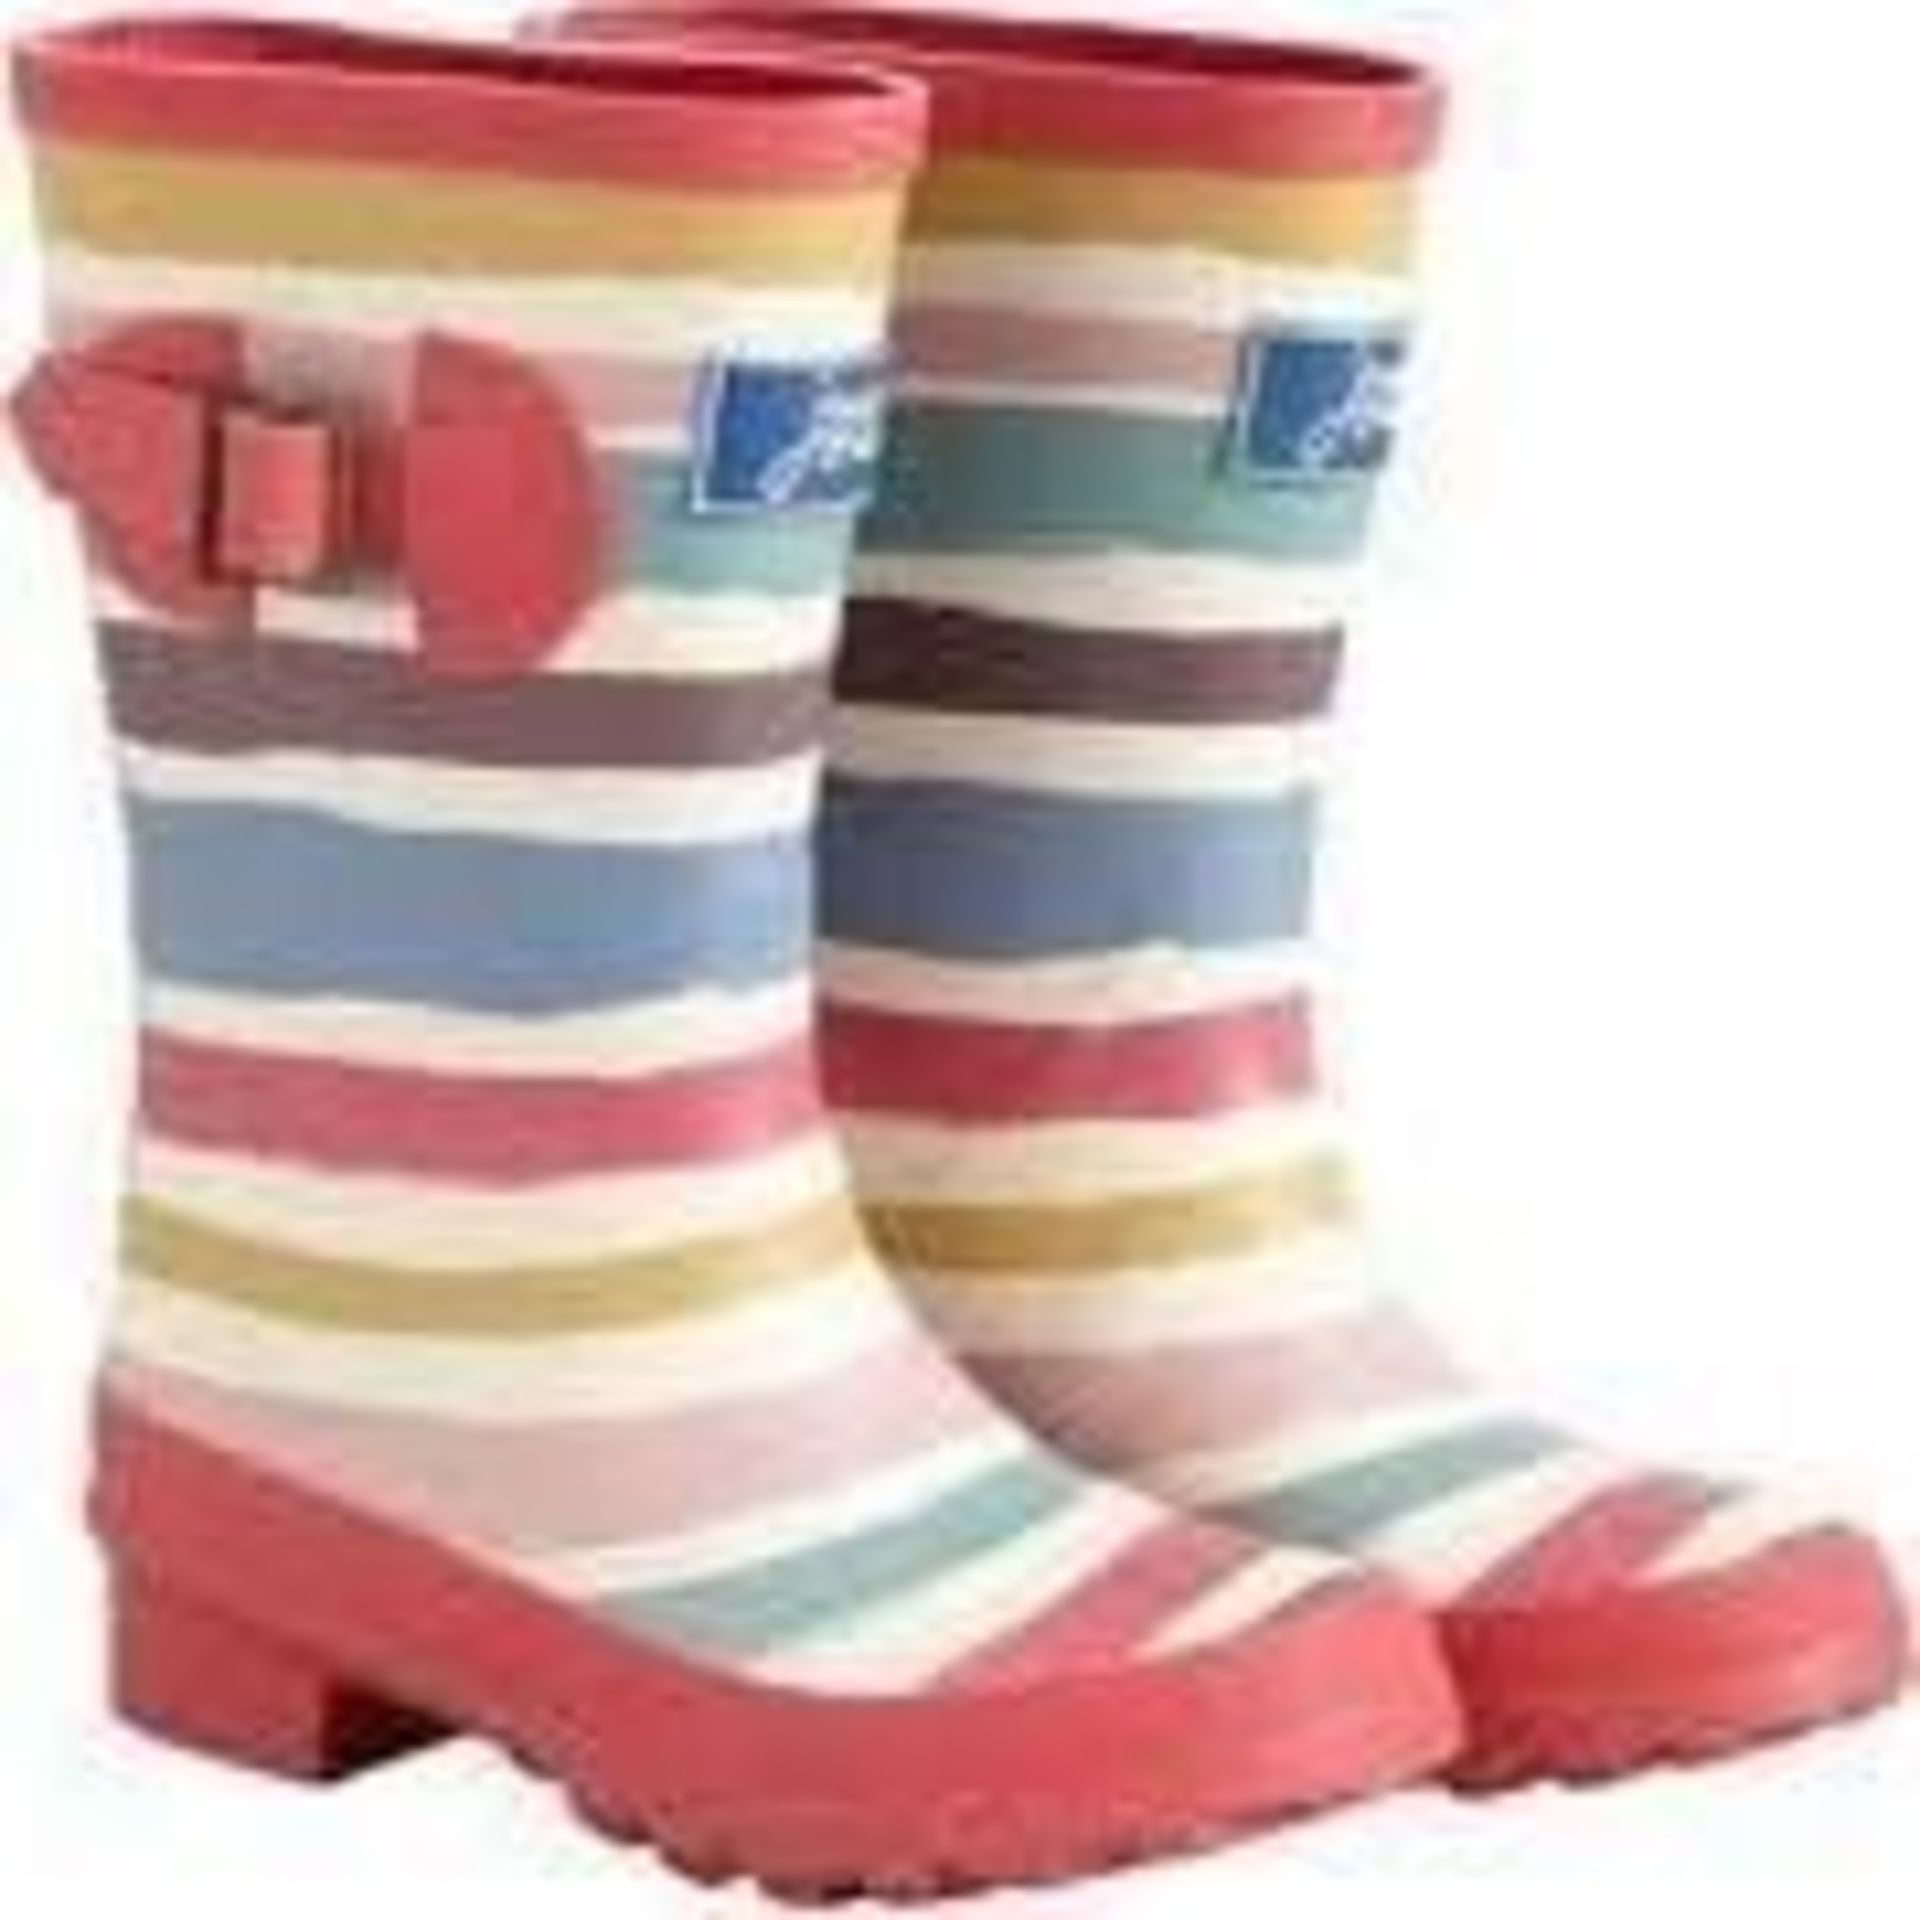 V Brand New Pair Girls Pink Stripe Wellington Boots Size 2 (Image Is Similar To Item)